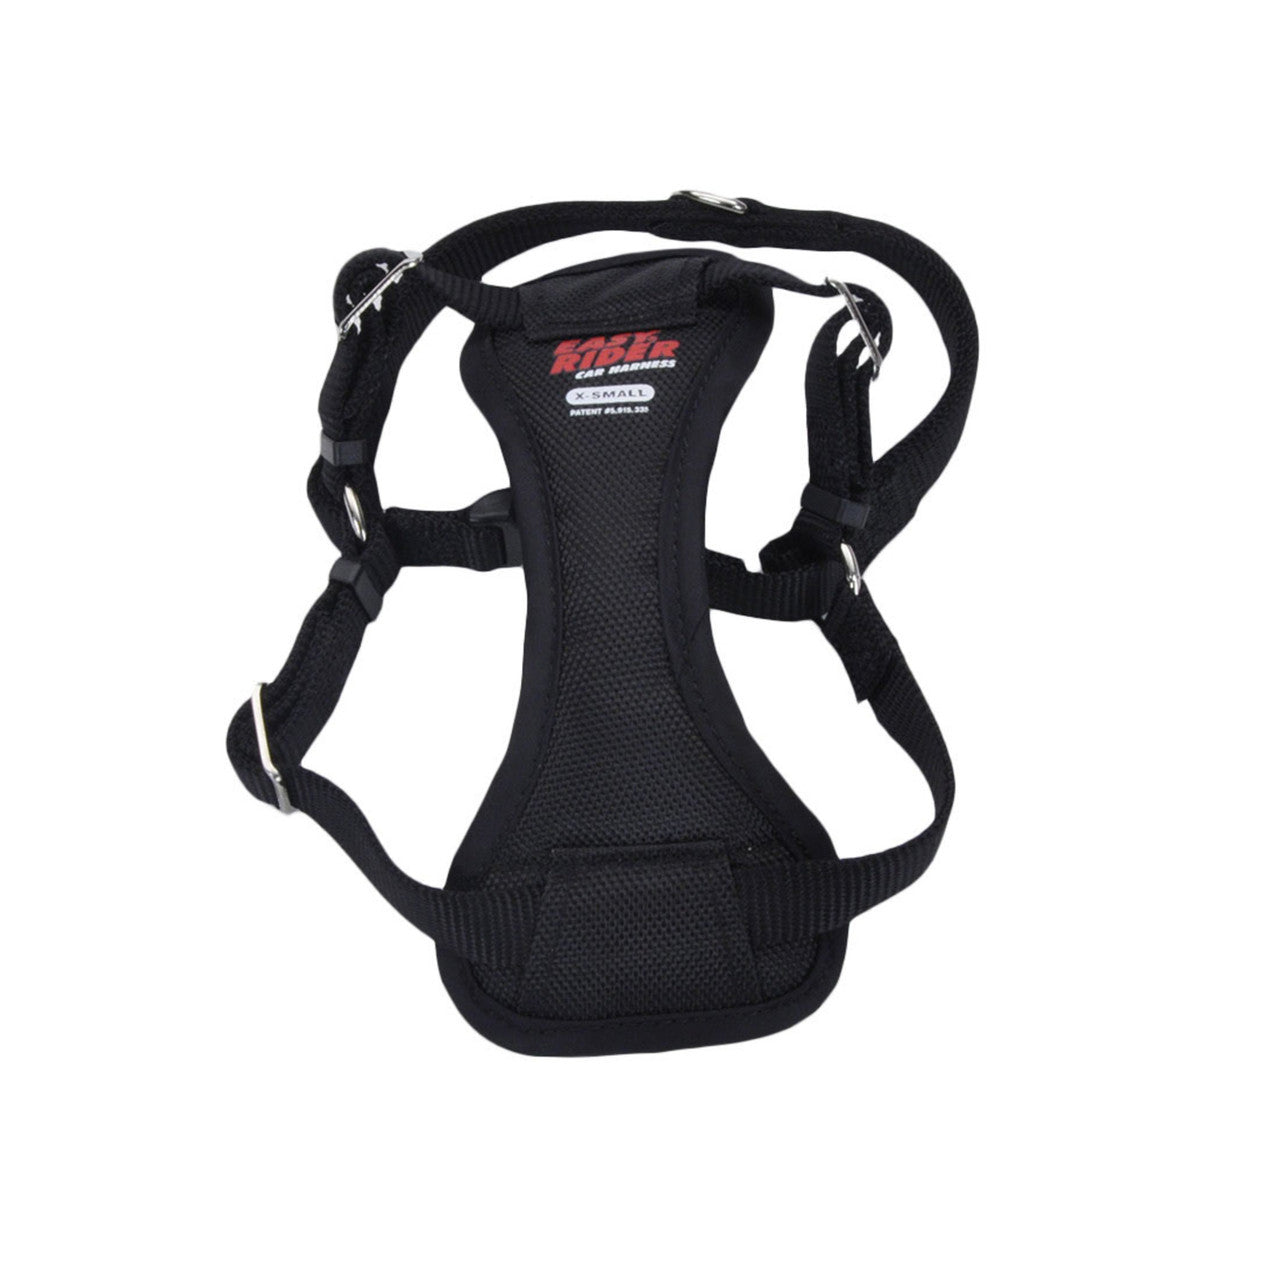 Easy Rider Adjustable Car Harness Black 12-18in XS